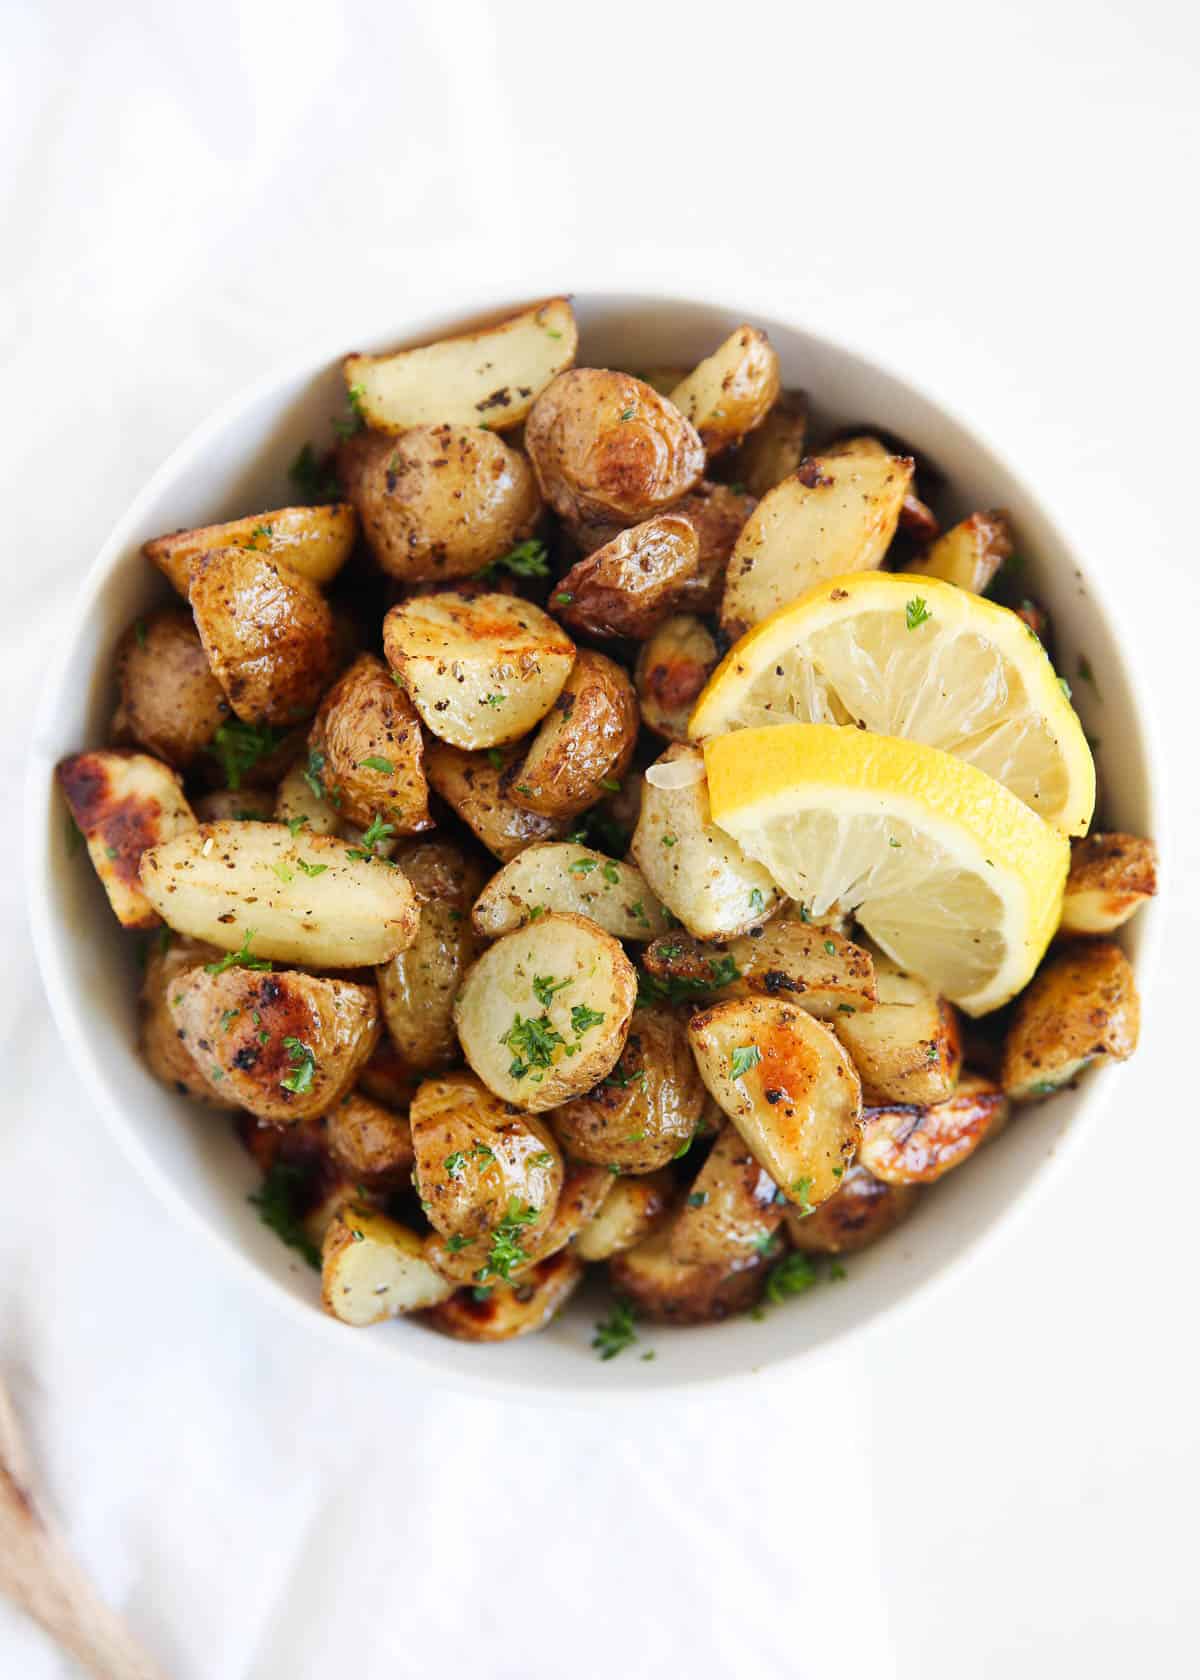 Greek potatoes in a white bowl topped with lemon slices.